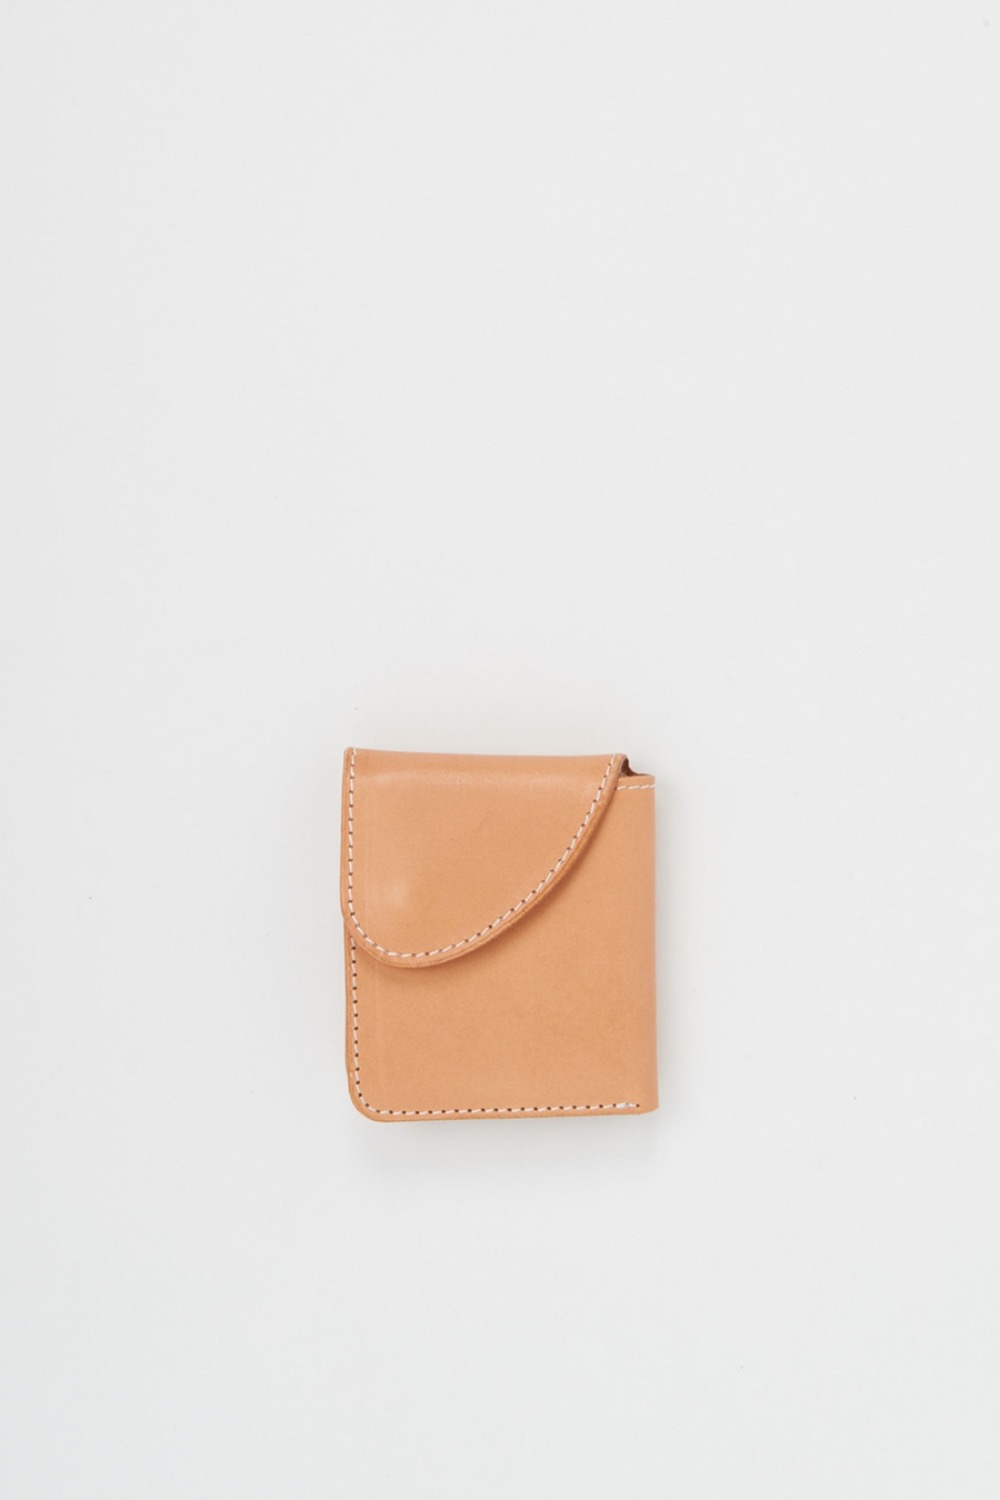 WALLET COW LEATHER NATURAL